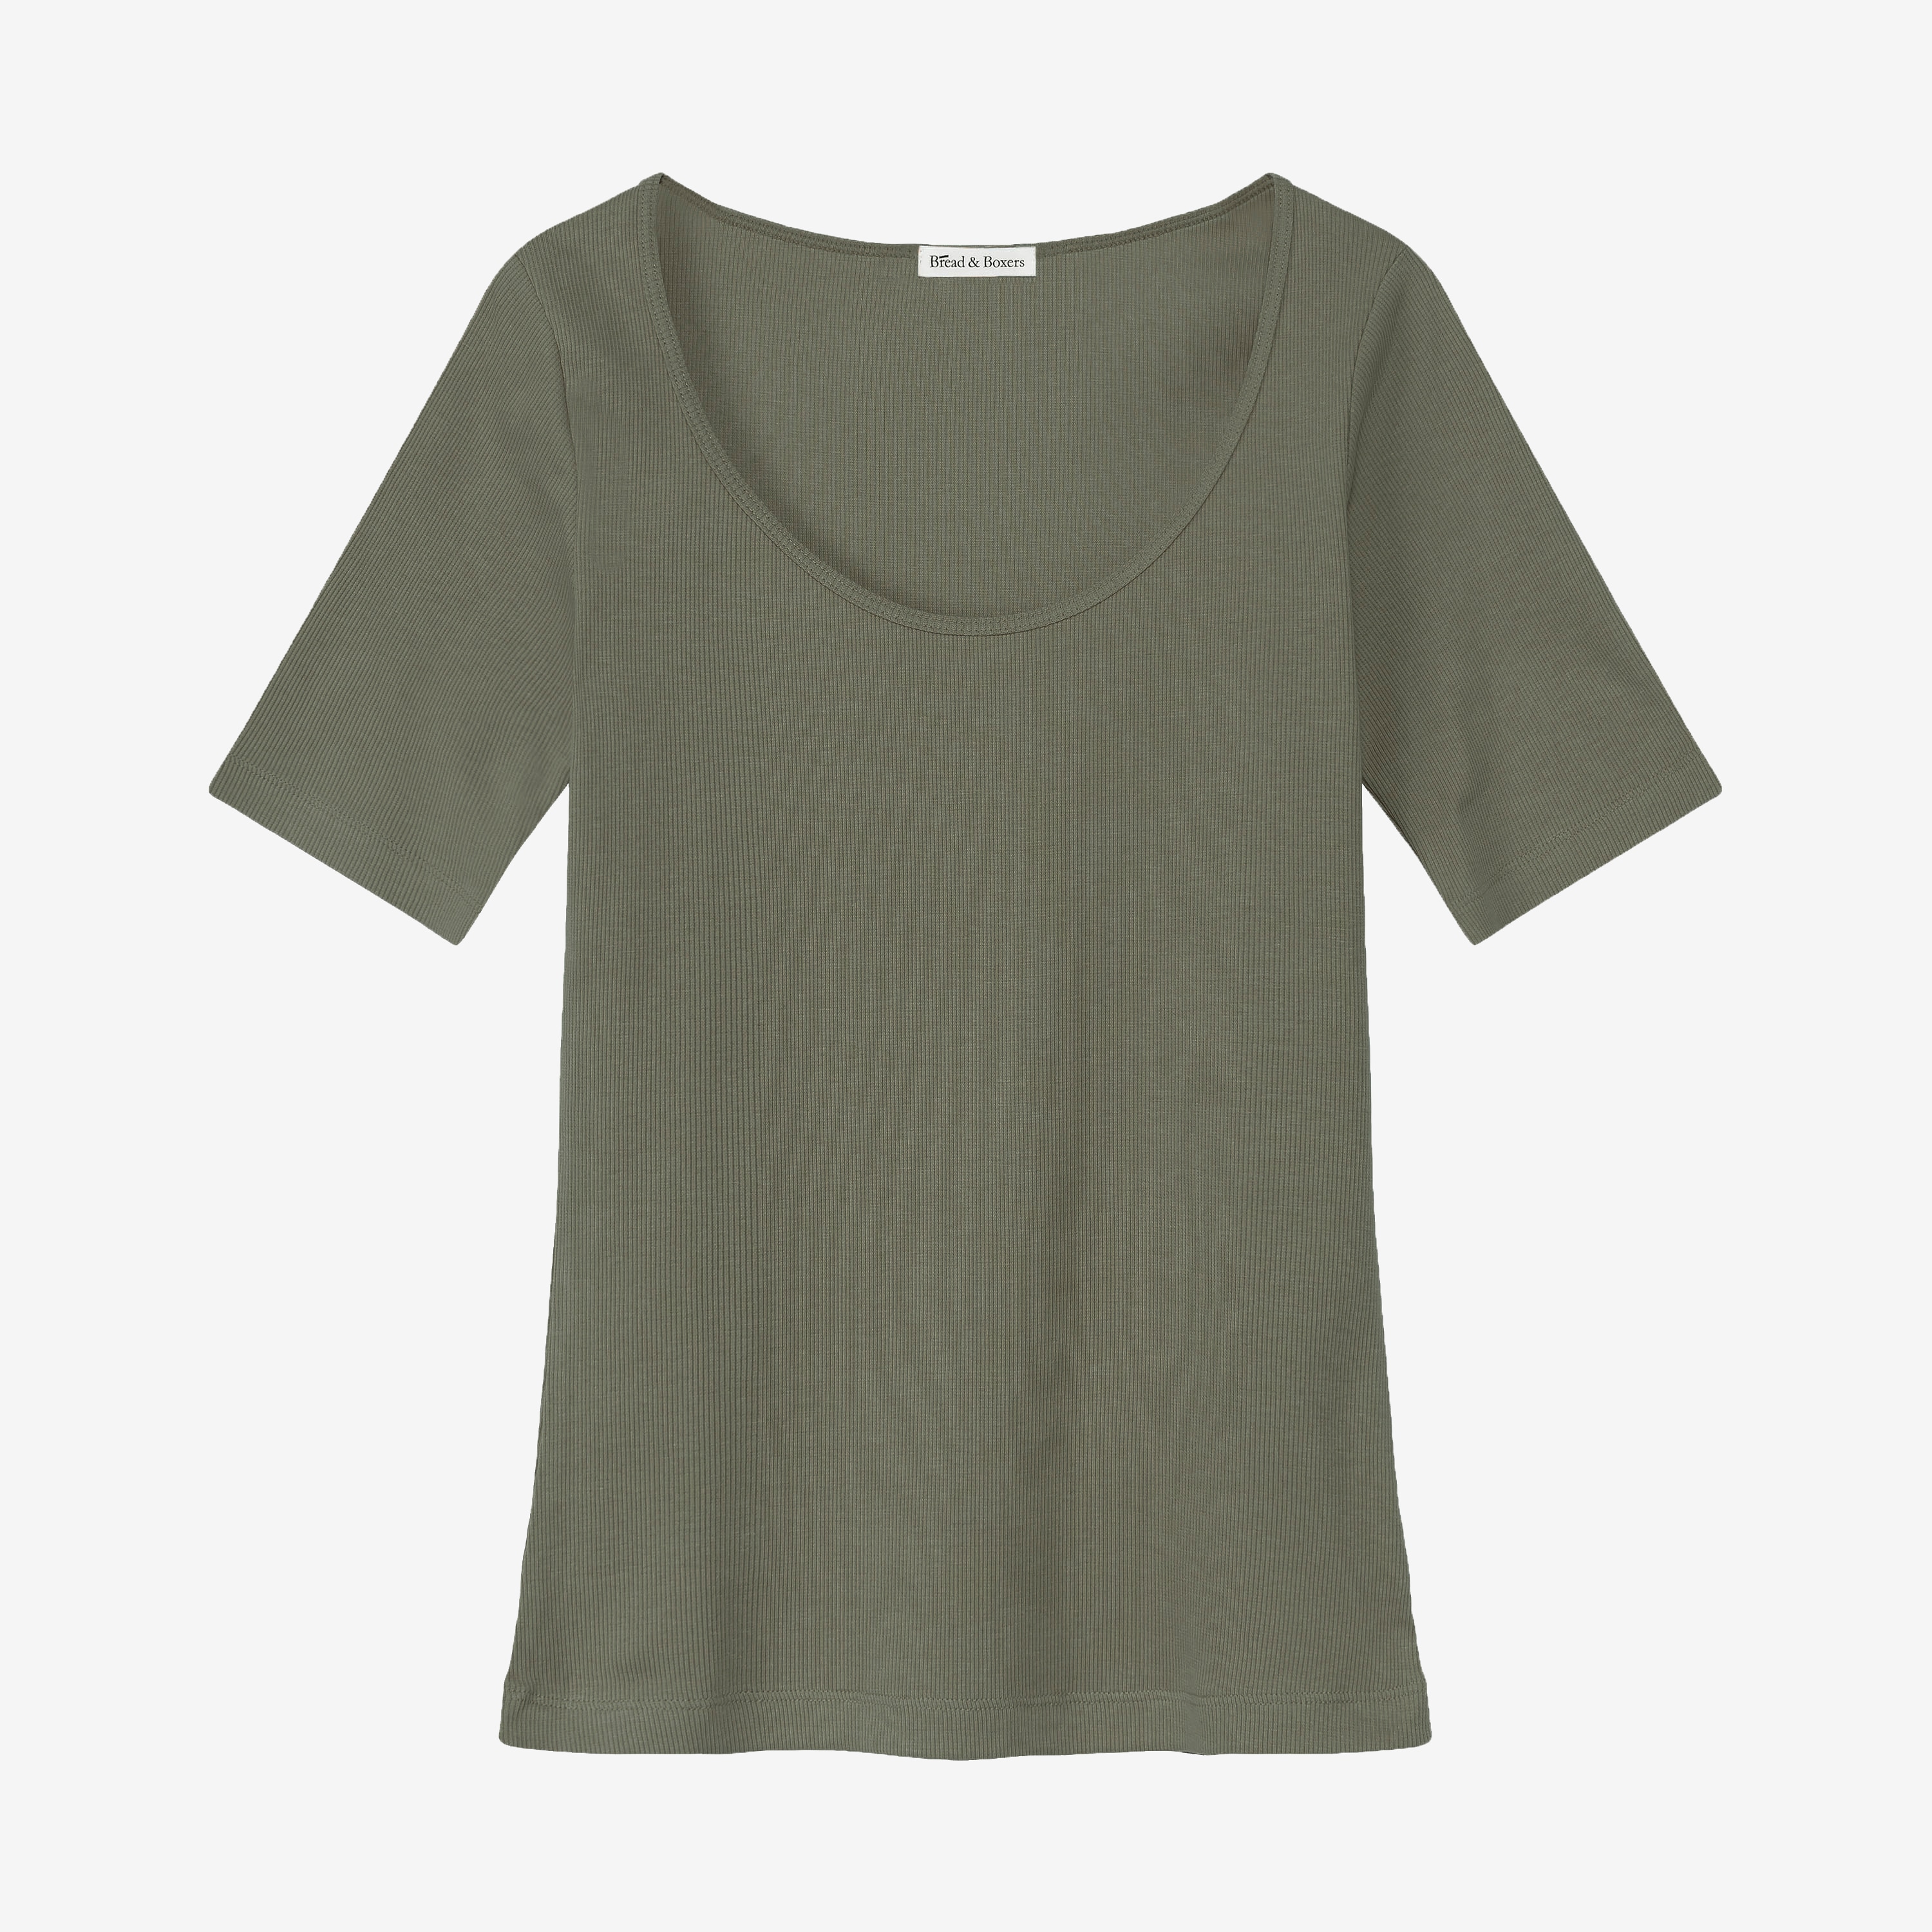 633-40_T-shirt_ribbed_olive-green_CO-A